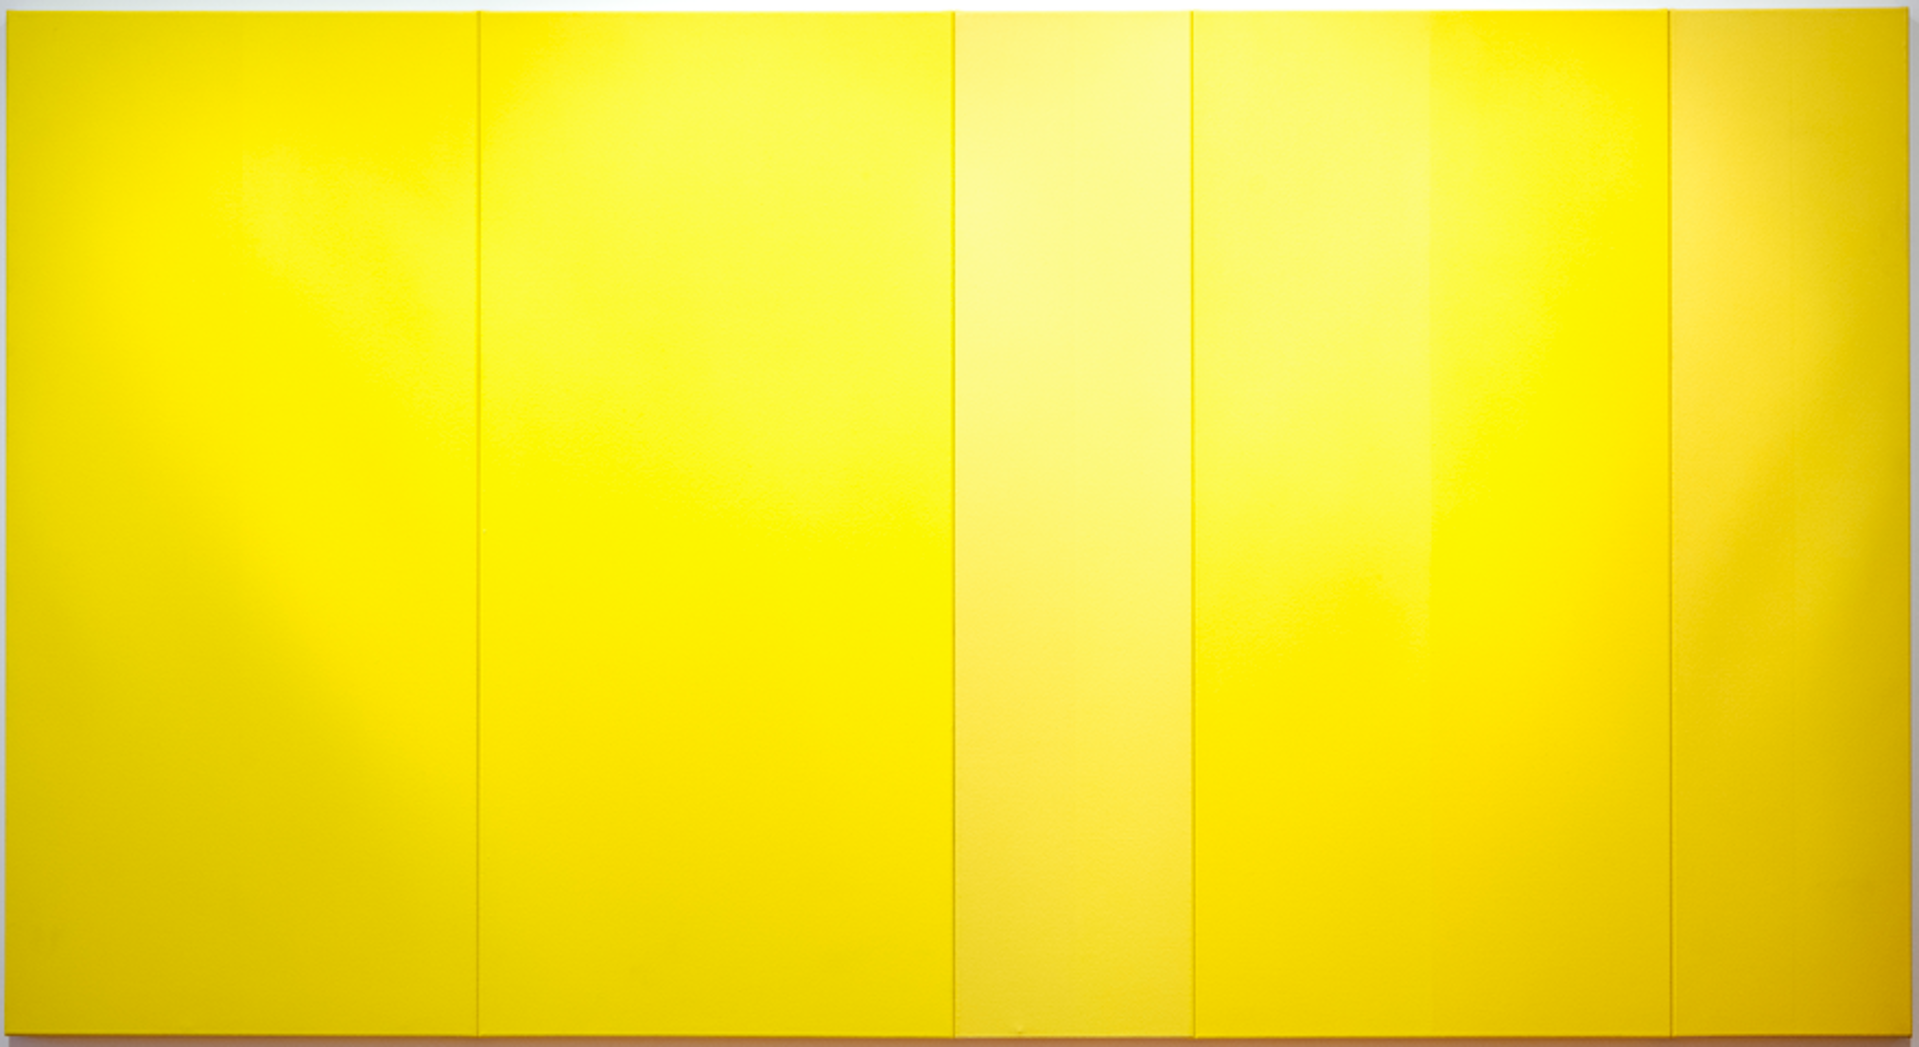 From Cadmium Yellow Light by Louis Comtois